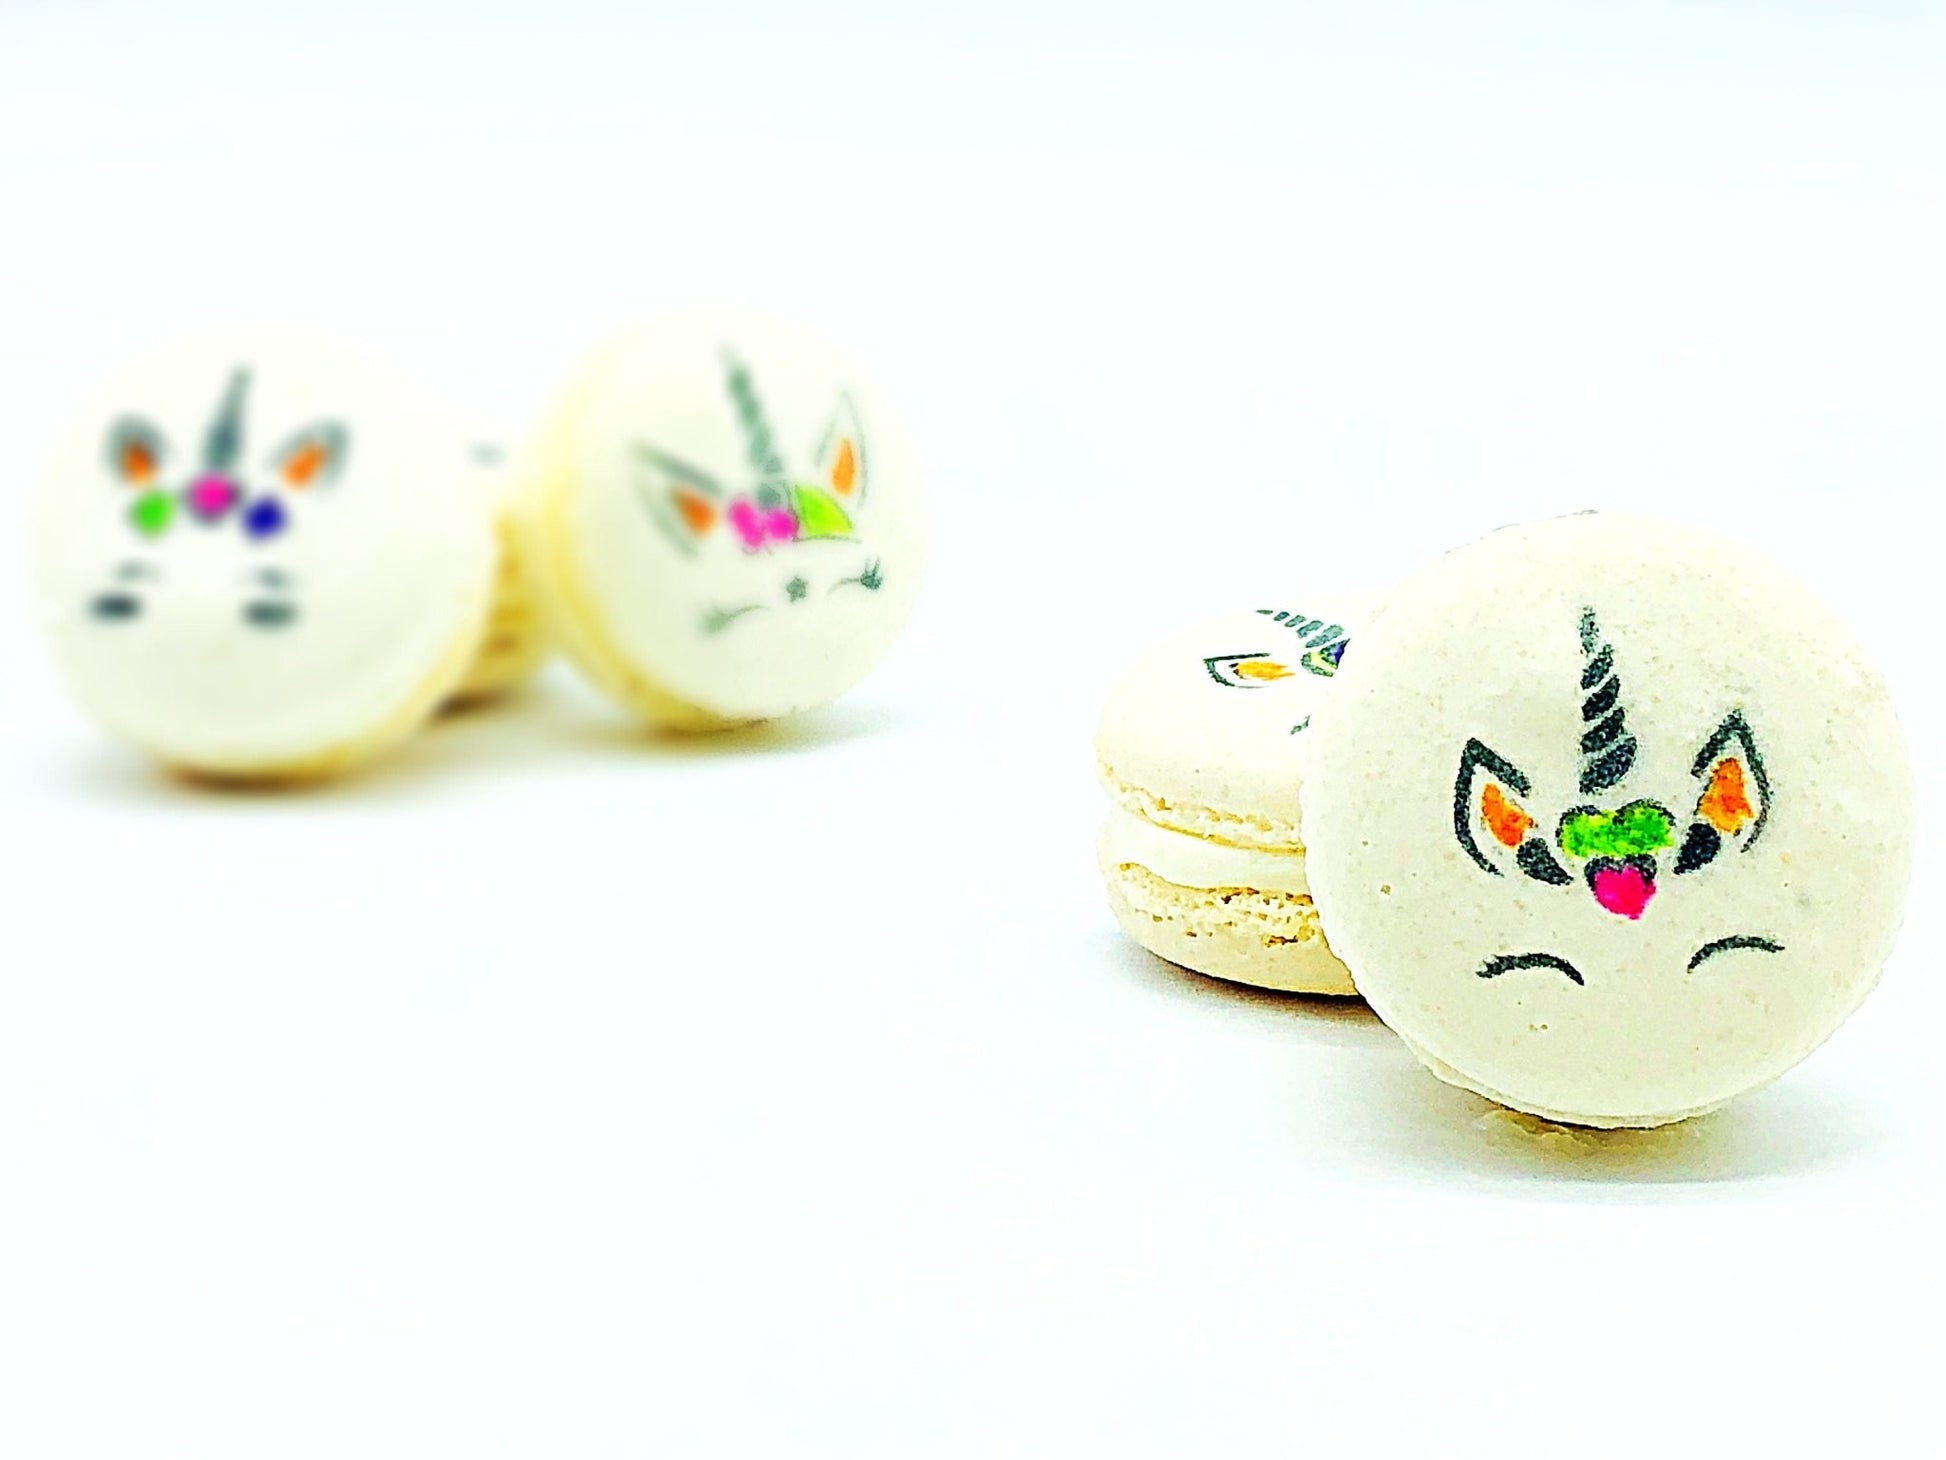 French Macaron The Unicorn | Available in 12 or 24 Pack - Macaron Centrale12 pack